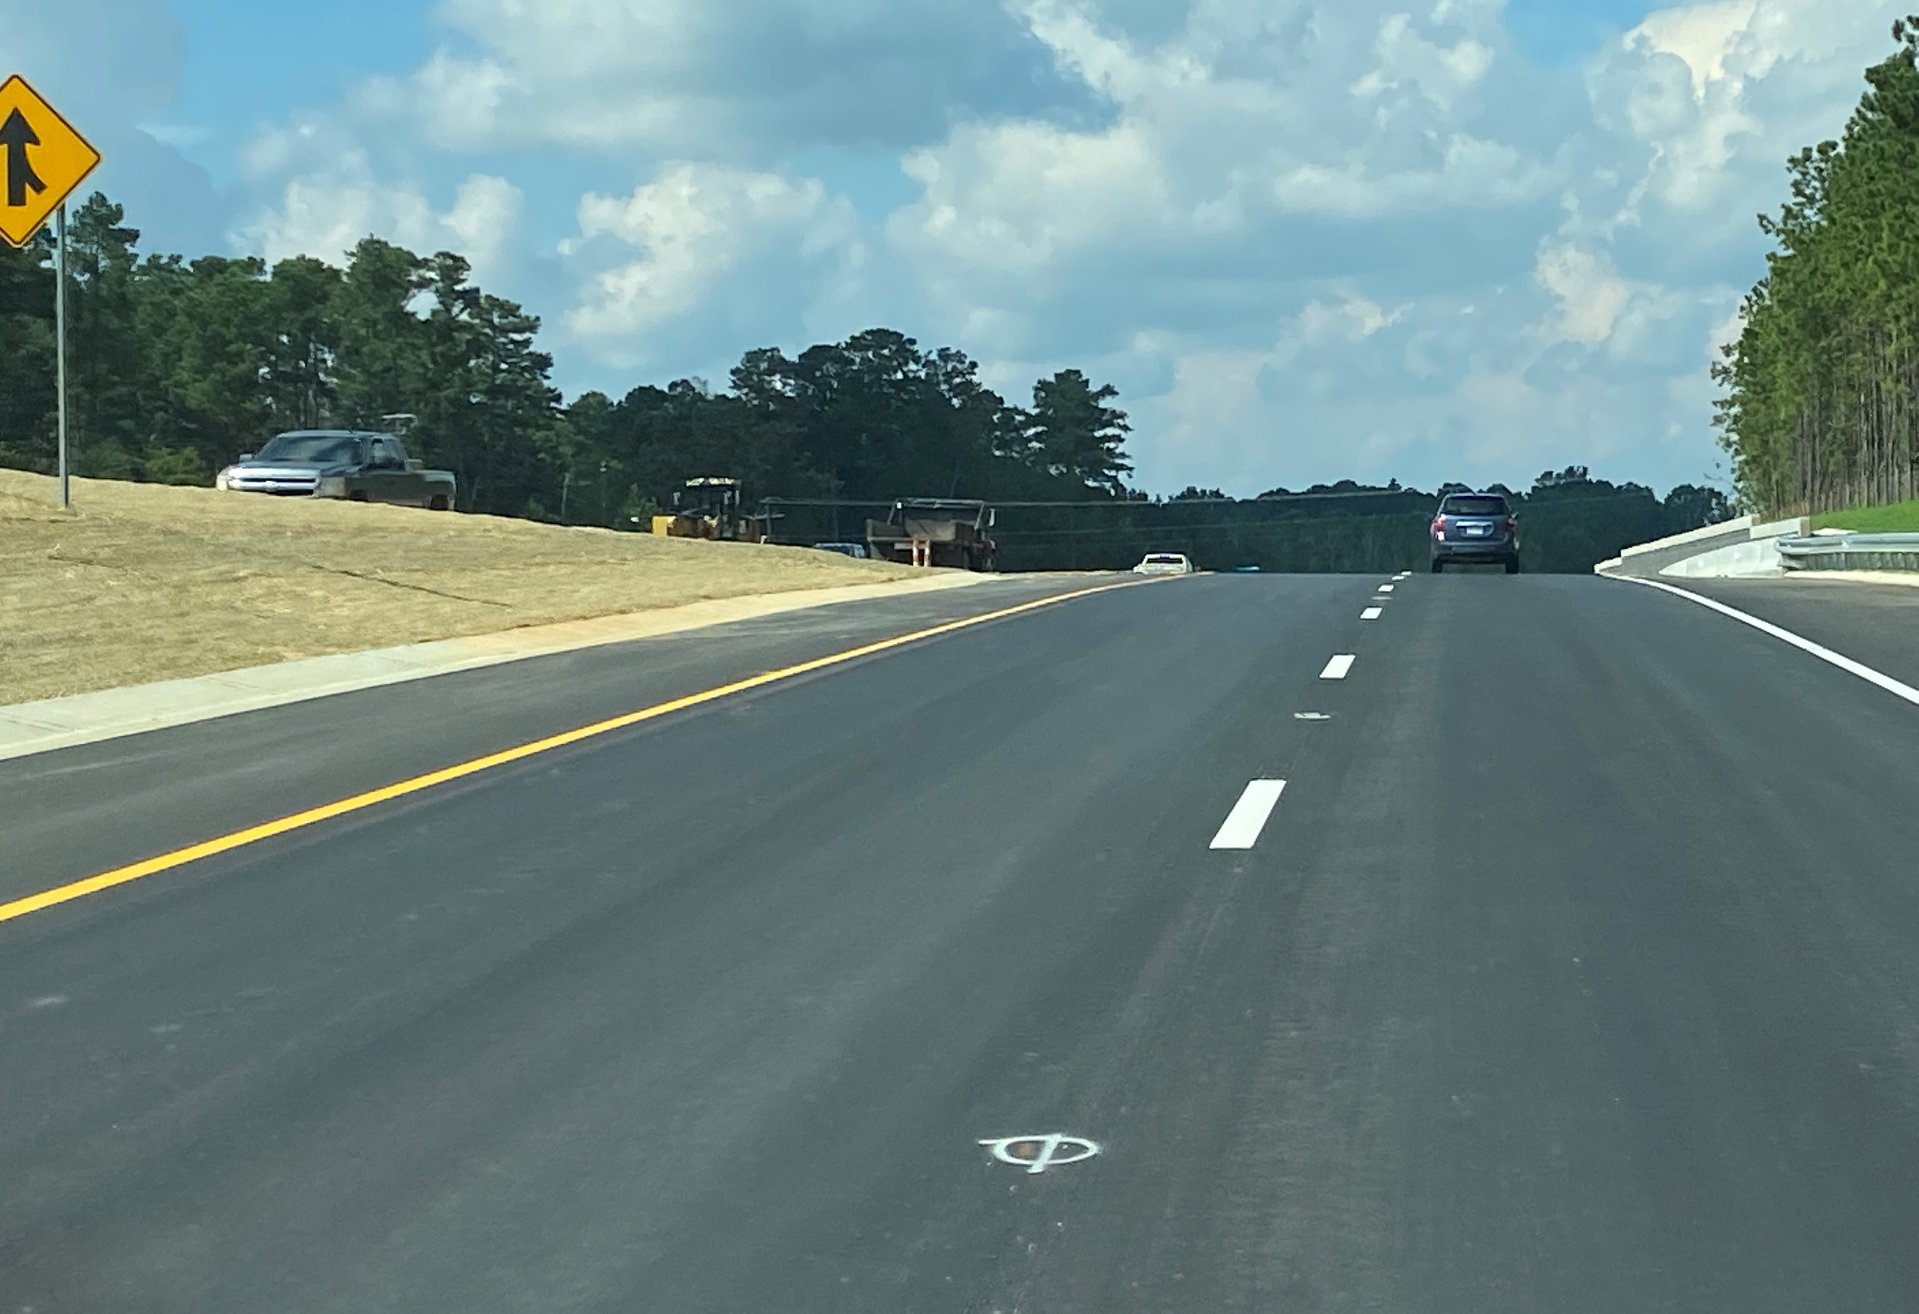 Image of heading up ramp to I-295 North from US 401 South in Fayetteville, 
                                     photo by David Johnson August 2020